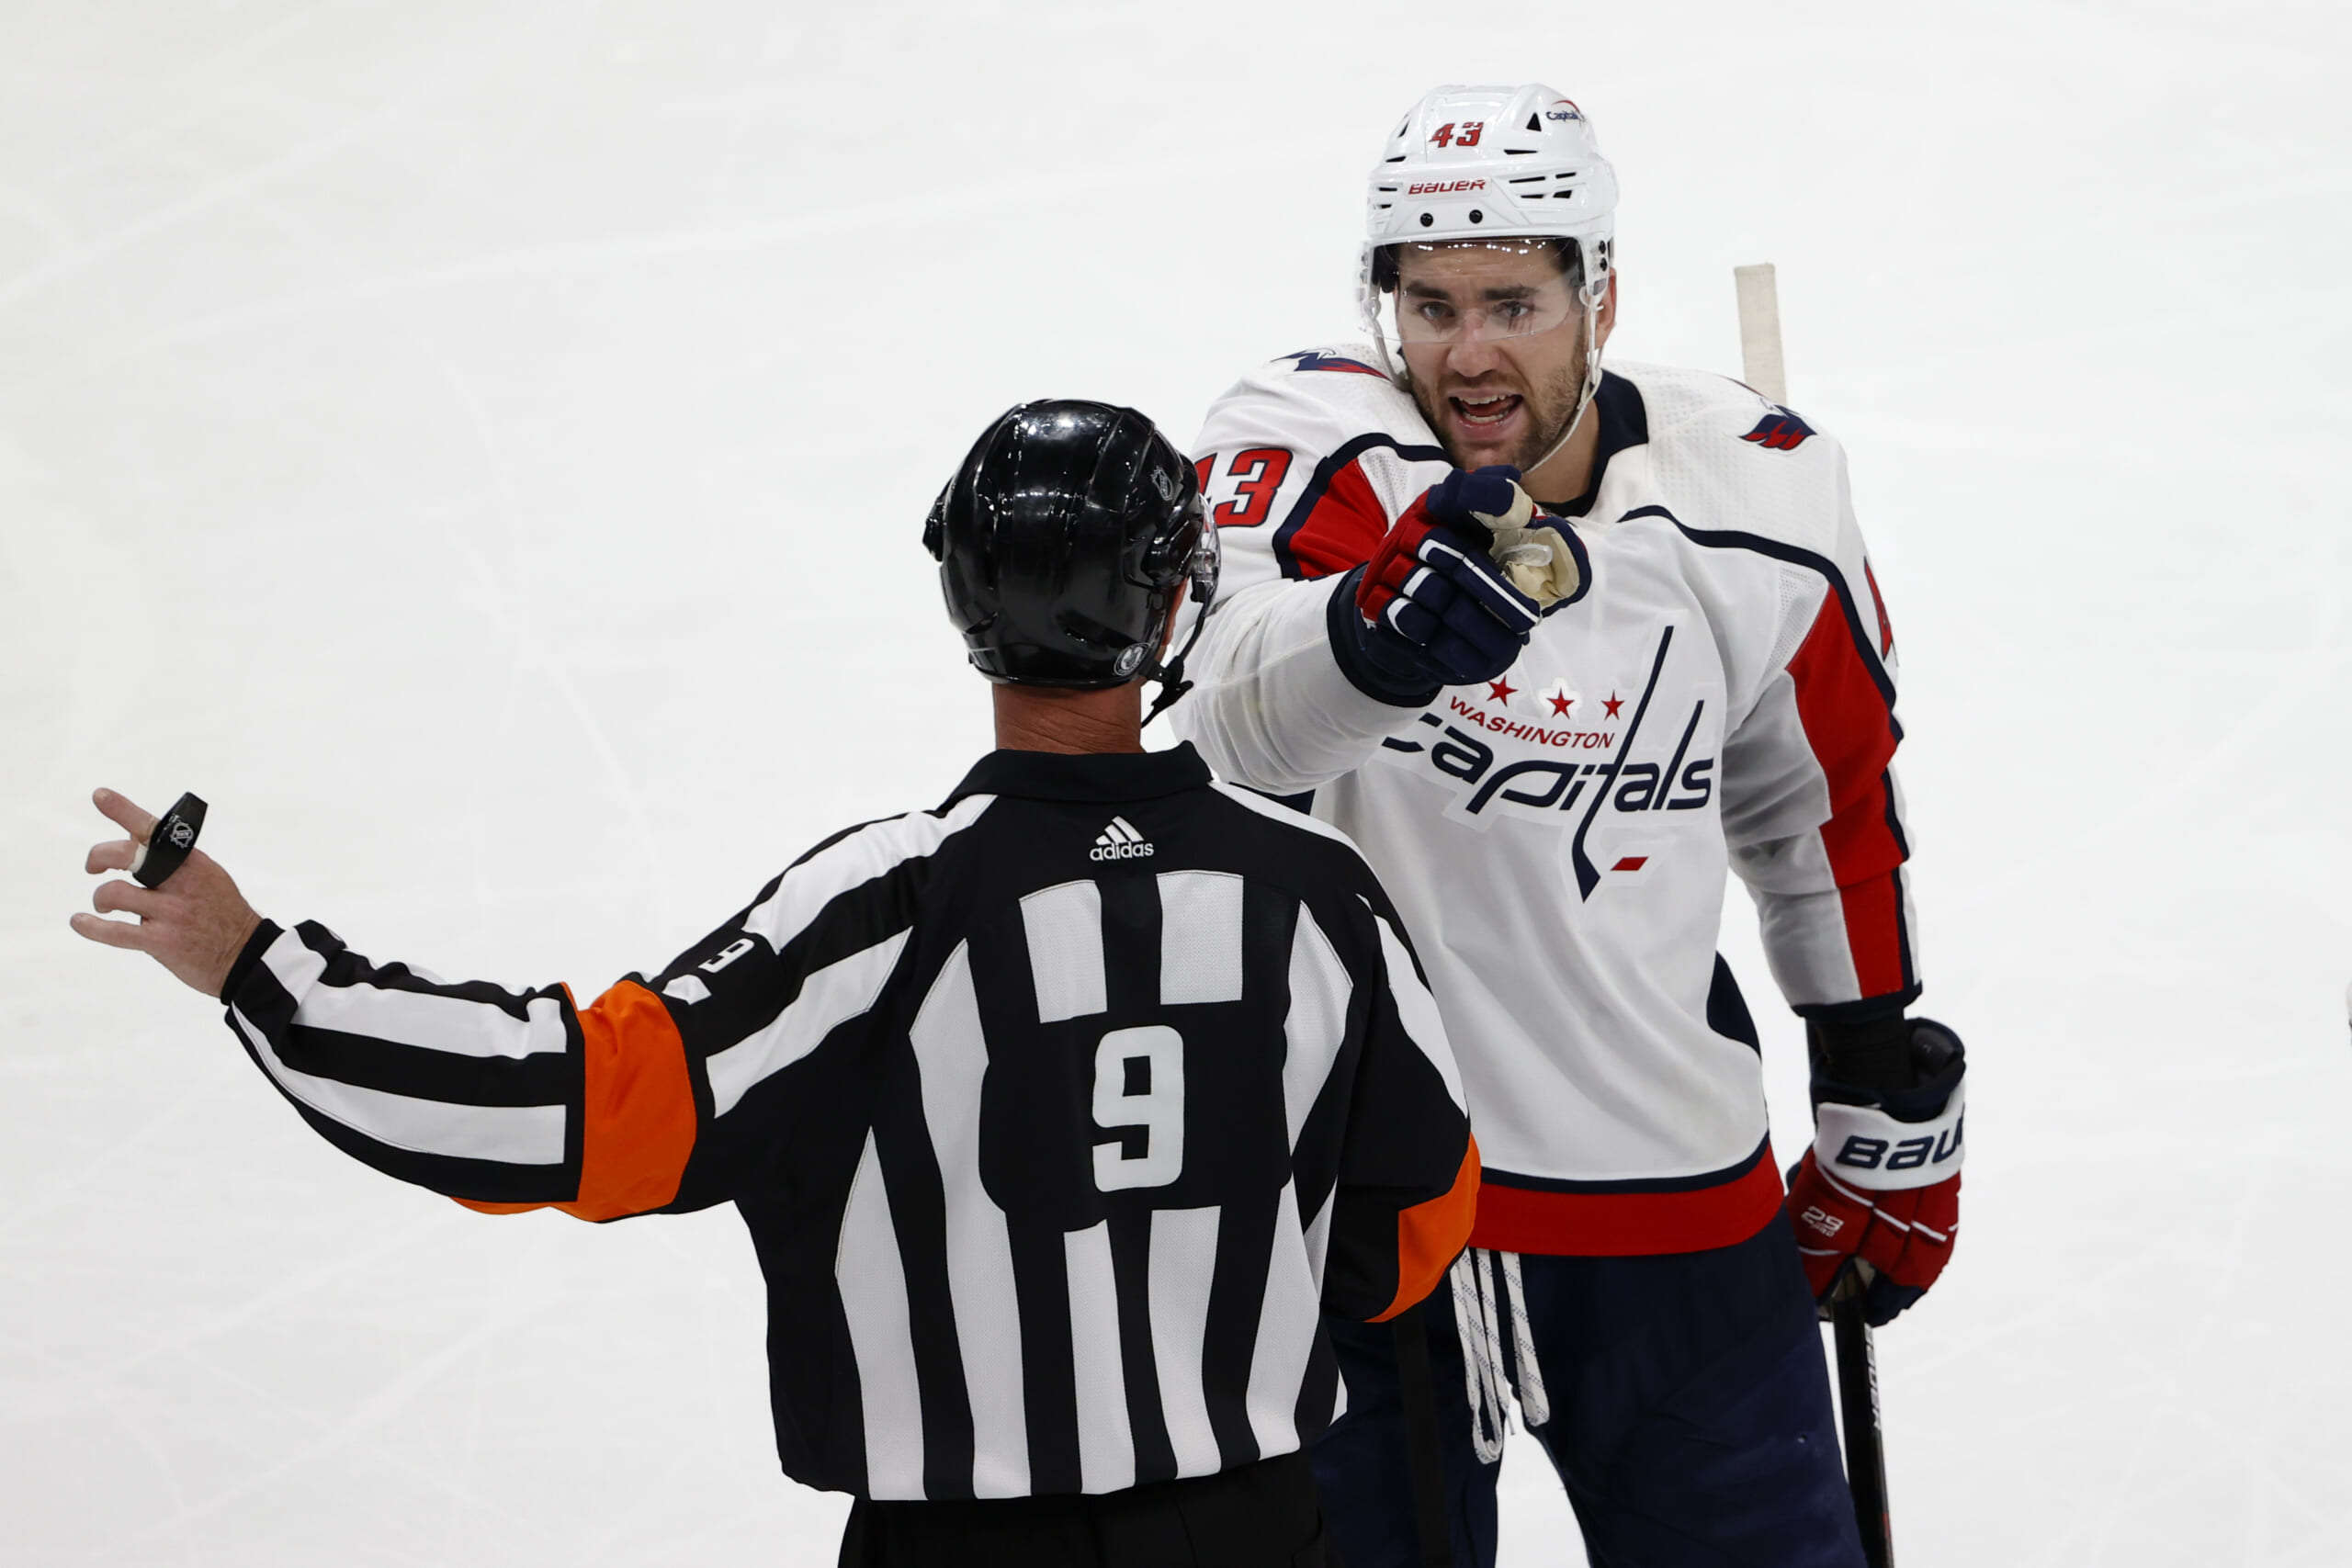 NHL Uproar: Capitals' Tom Wilson Barely Fined After Punch, Body-Slam